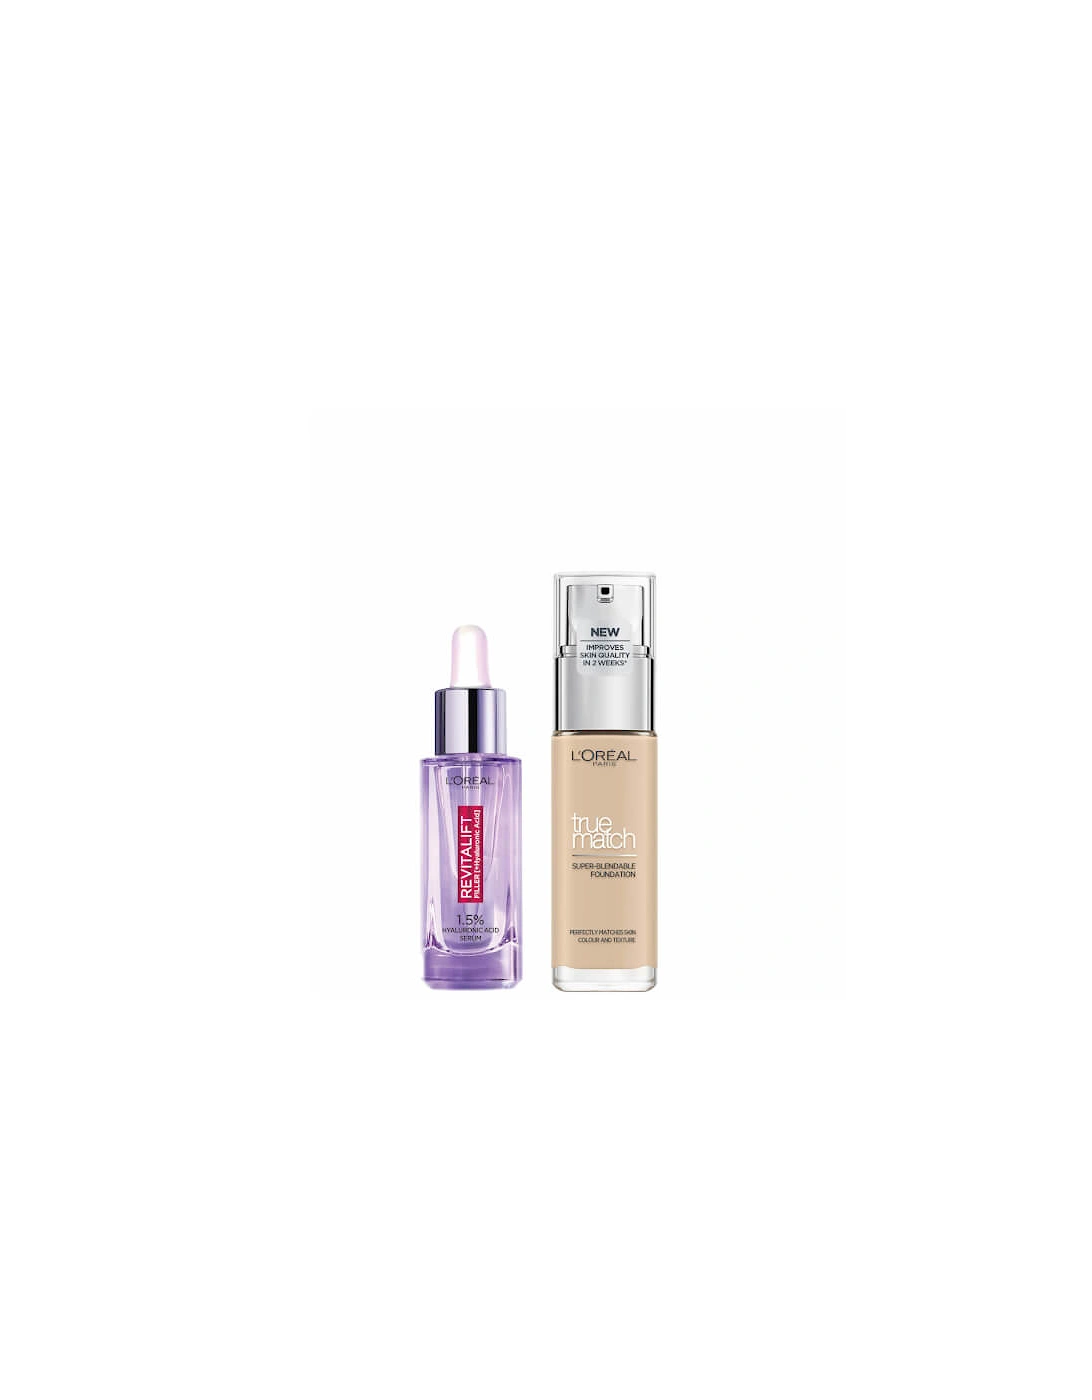 L’Oreal Paris Hyaluronic Acid Filler Serum and True Match Hyaluronic Acid Foundation Duo - 1N Ivory, 2 of 1